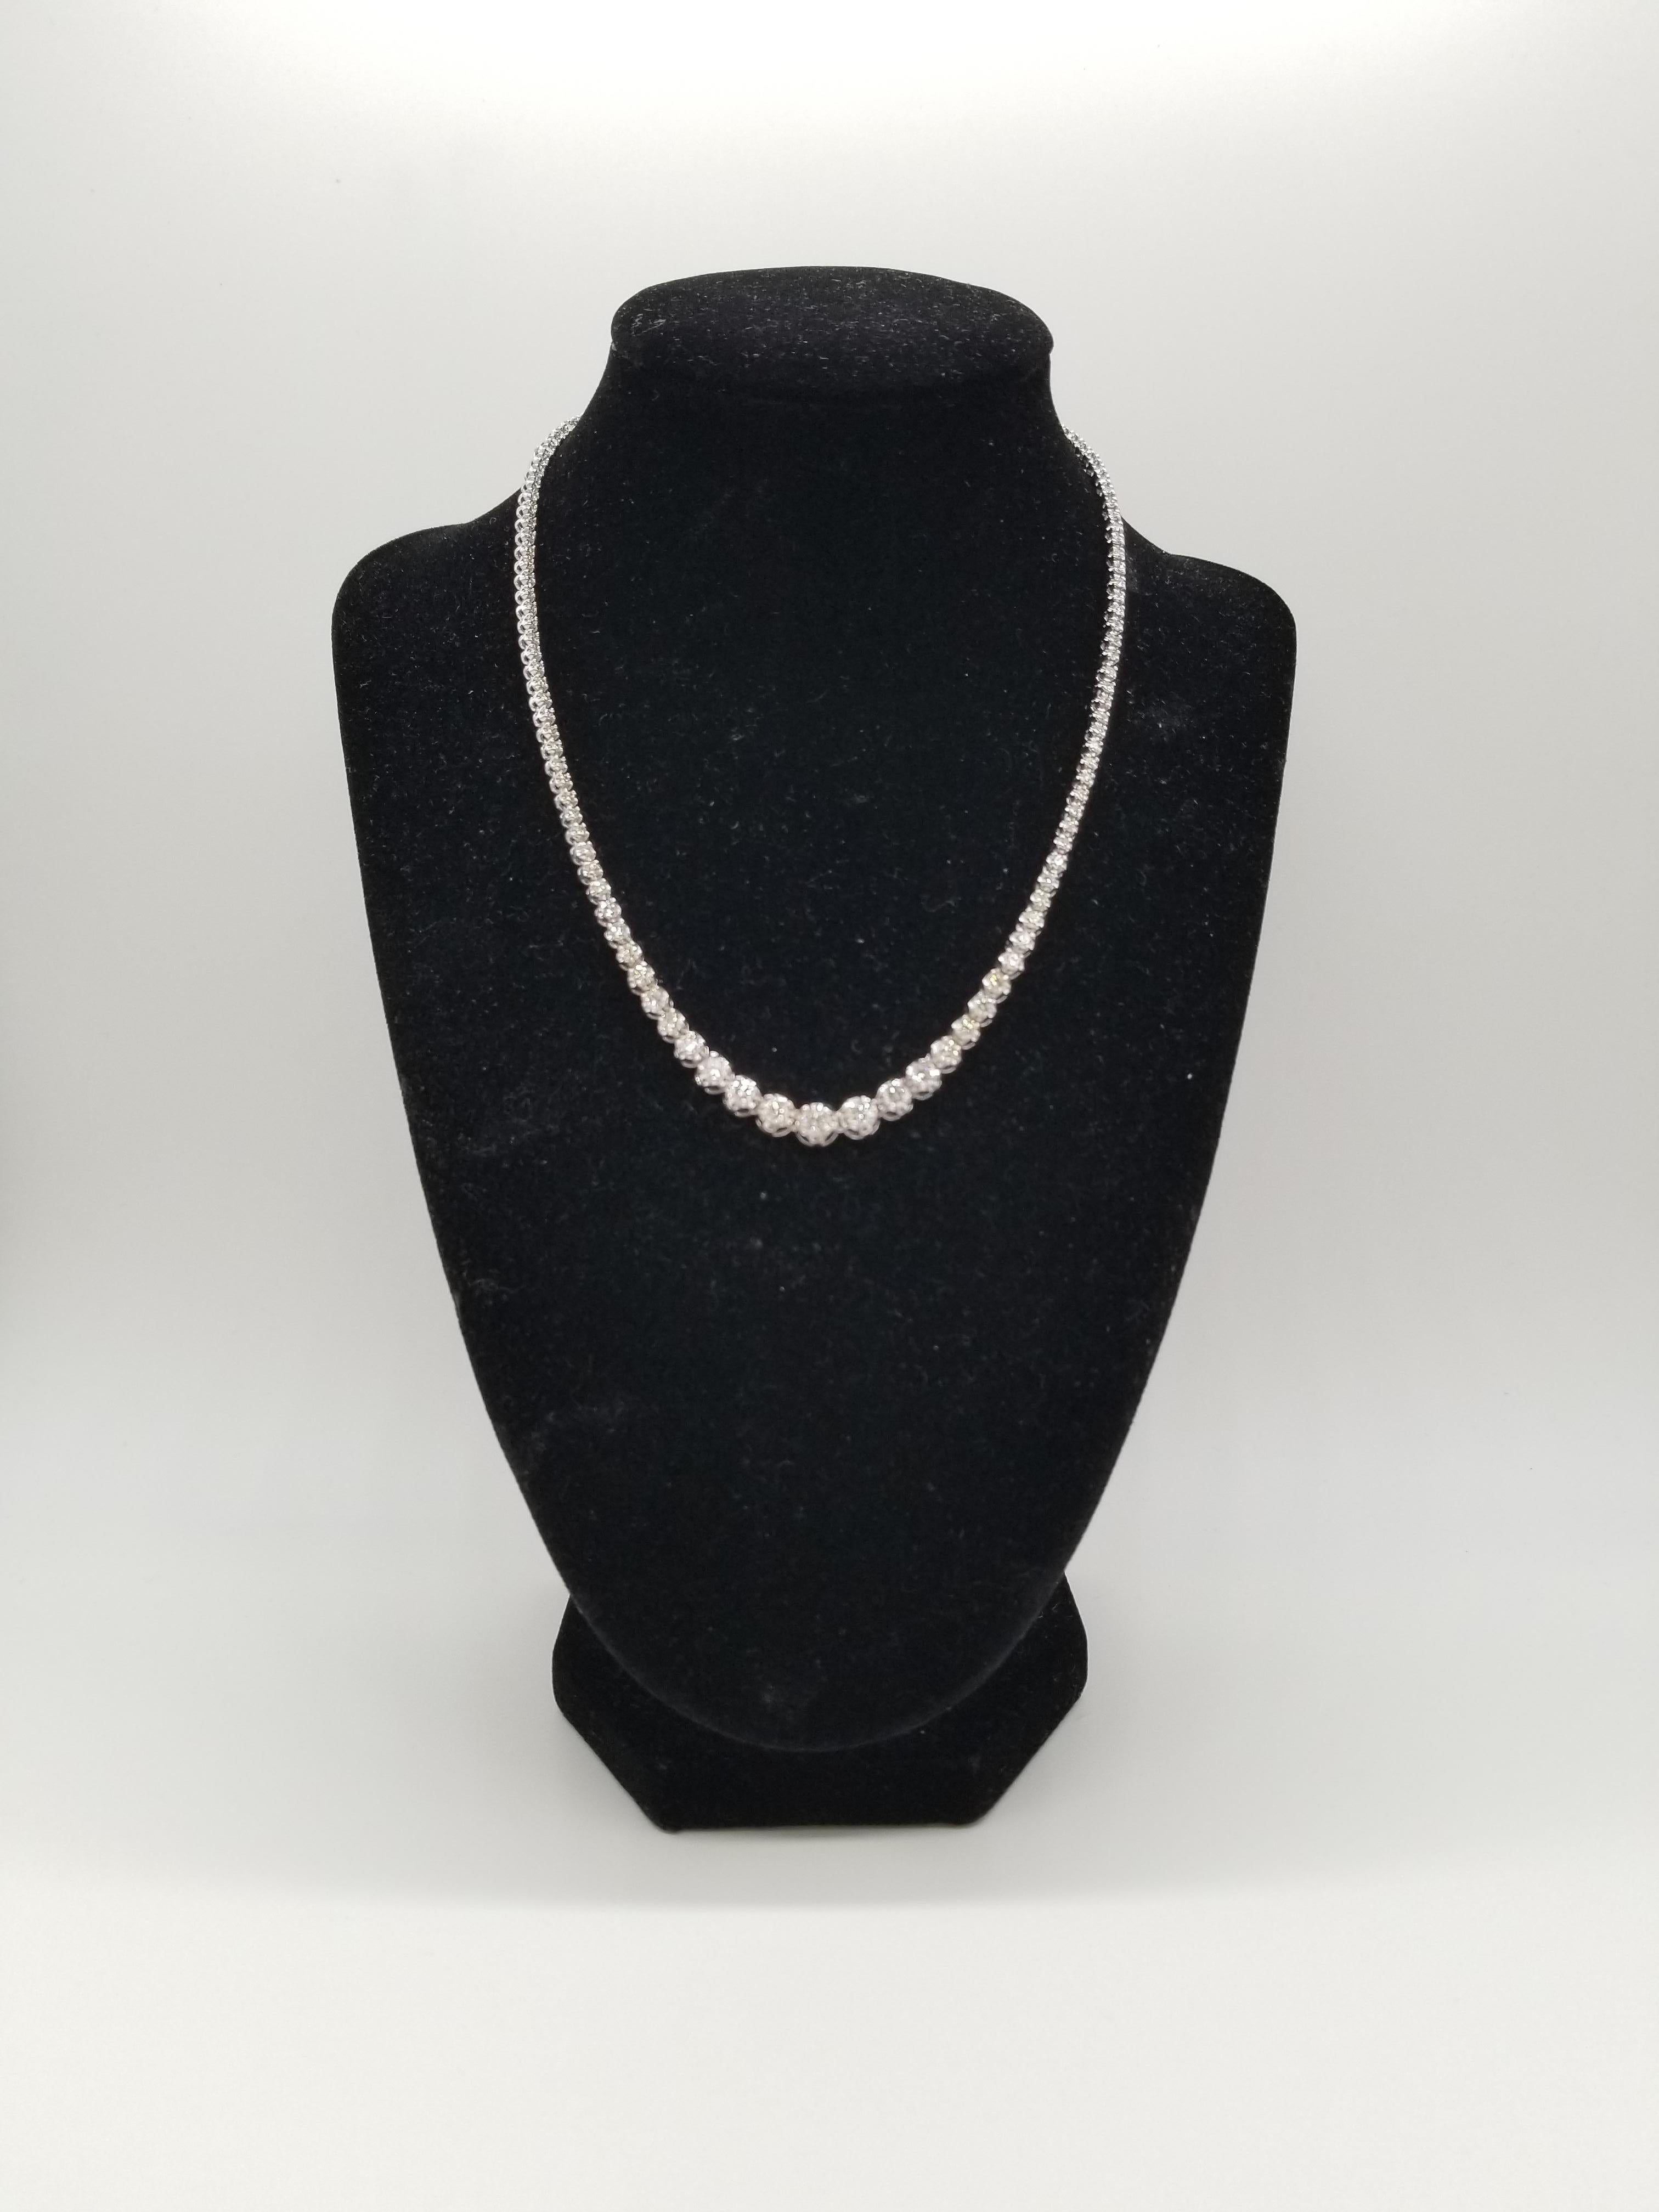 Stunning 14 Karat White Gold Round Brilliant Cut Diamond Tennis Necklace set on 4- prong buttercup setting. The total diamond weight is 5.95 carats. The closure is an insert clasp with safety clasp. Length is 16 inches. center stone 0.35 ct. Very